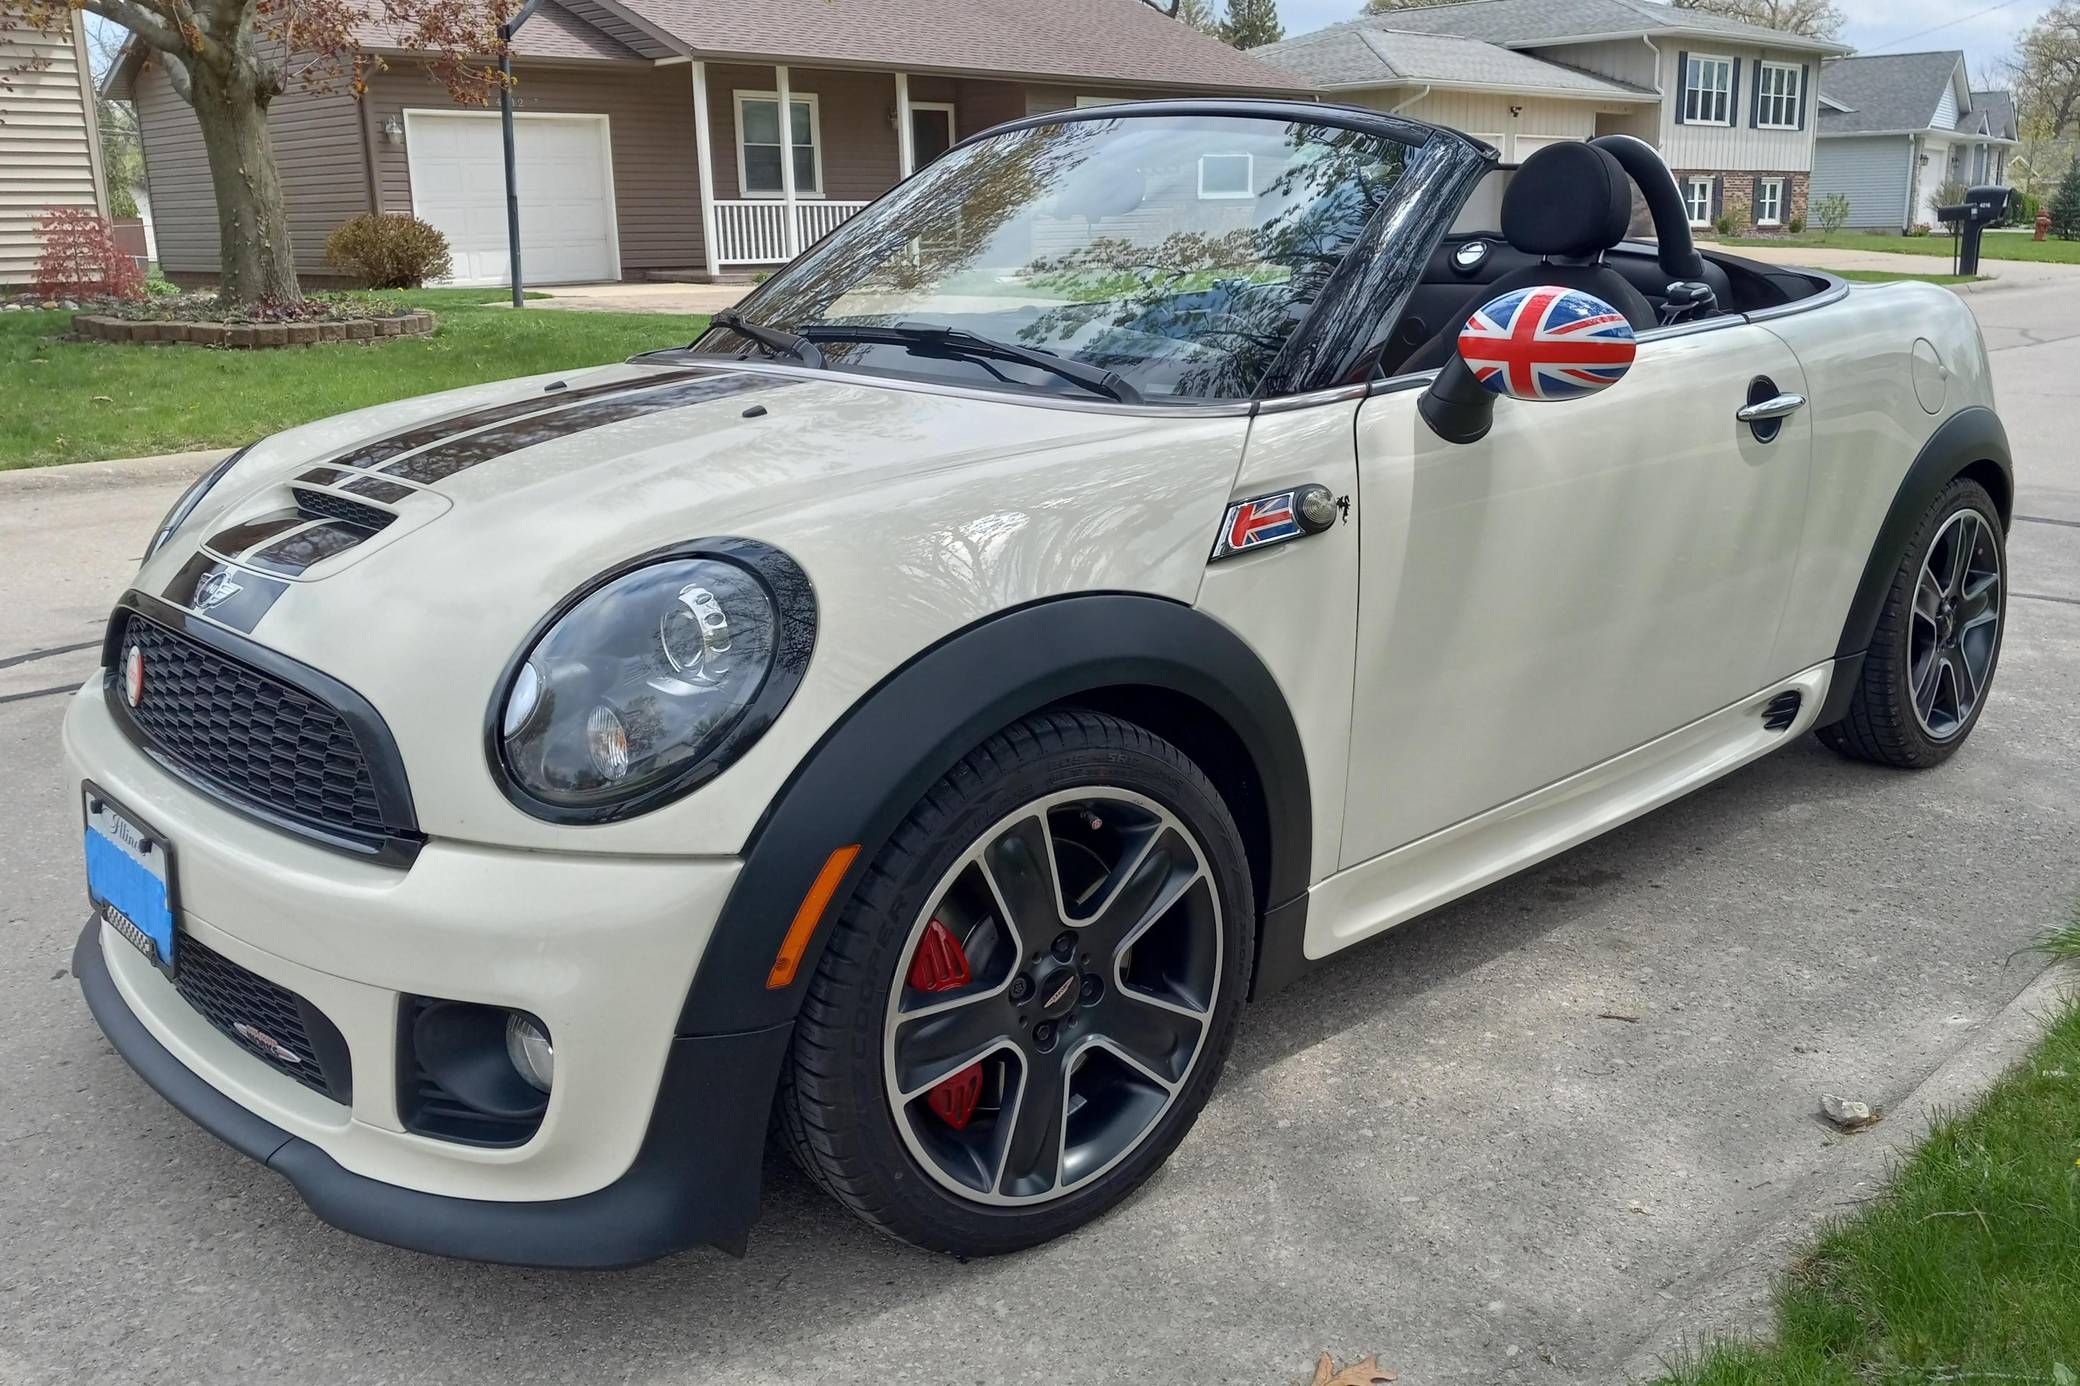 R59 MINI Cooper S Roadster - Driving Footage 